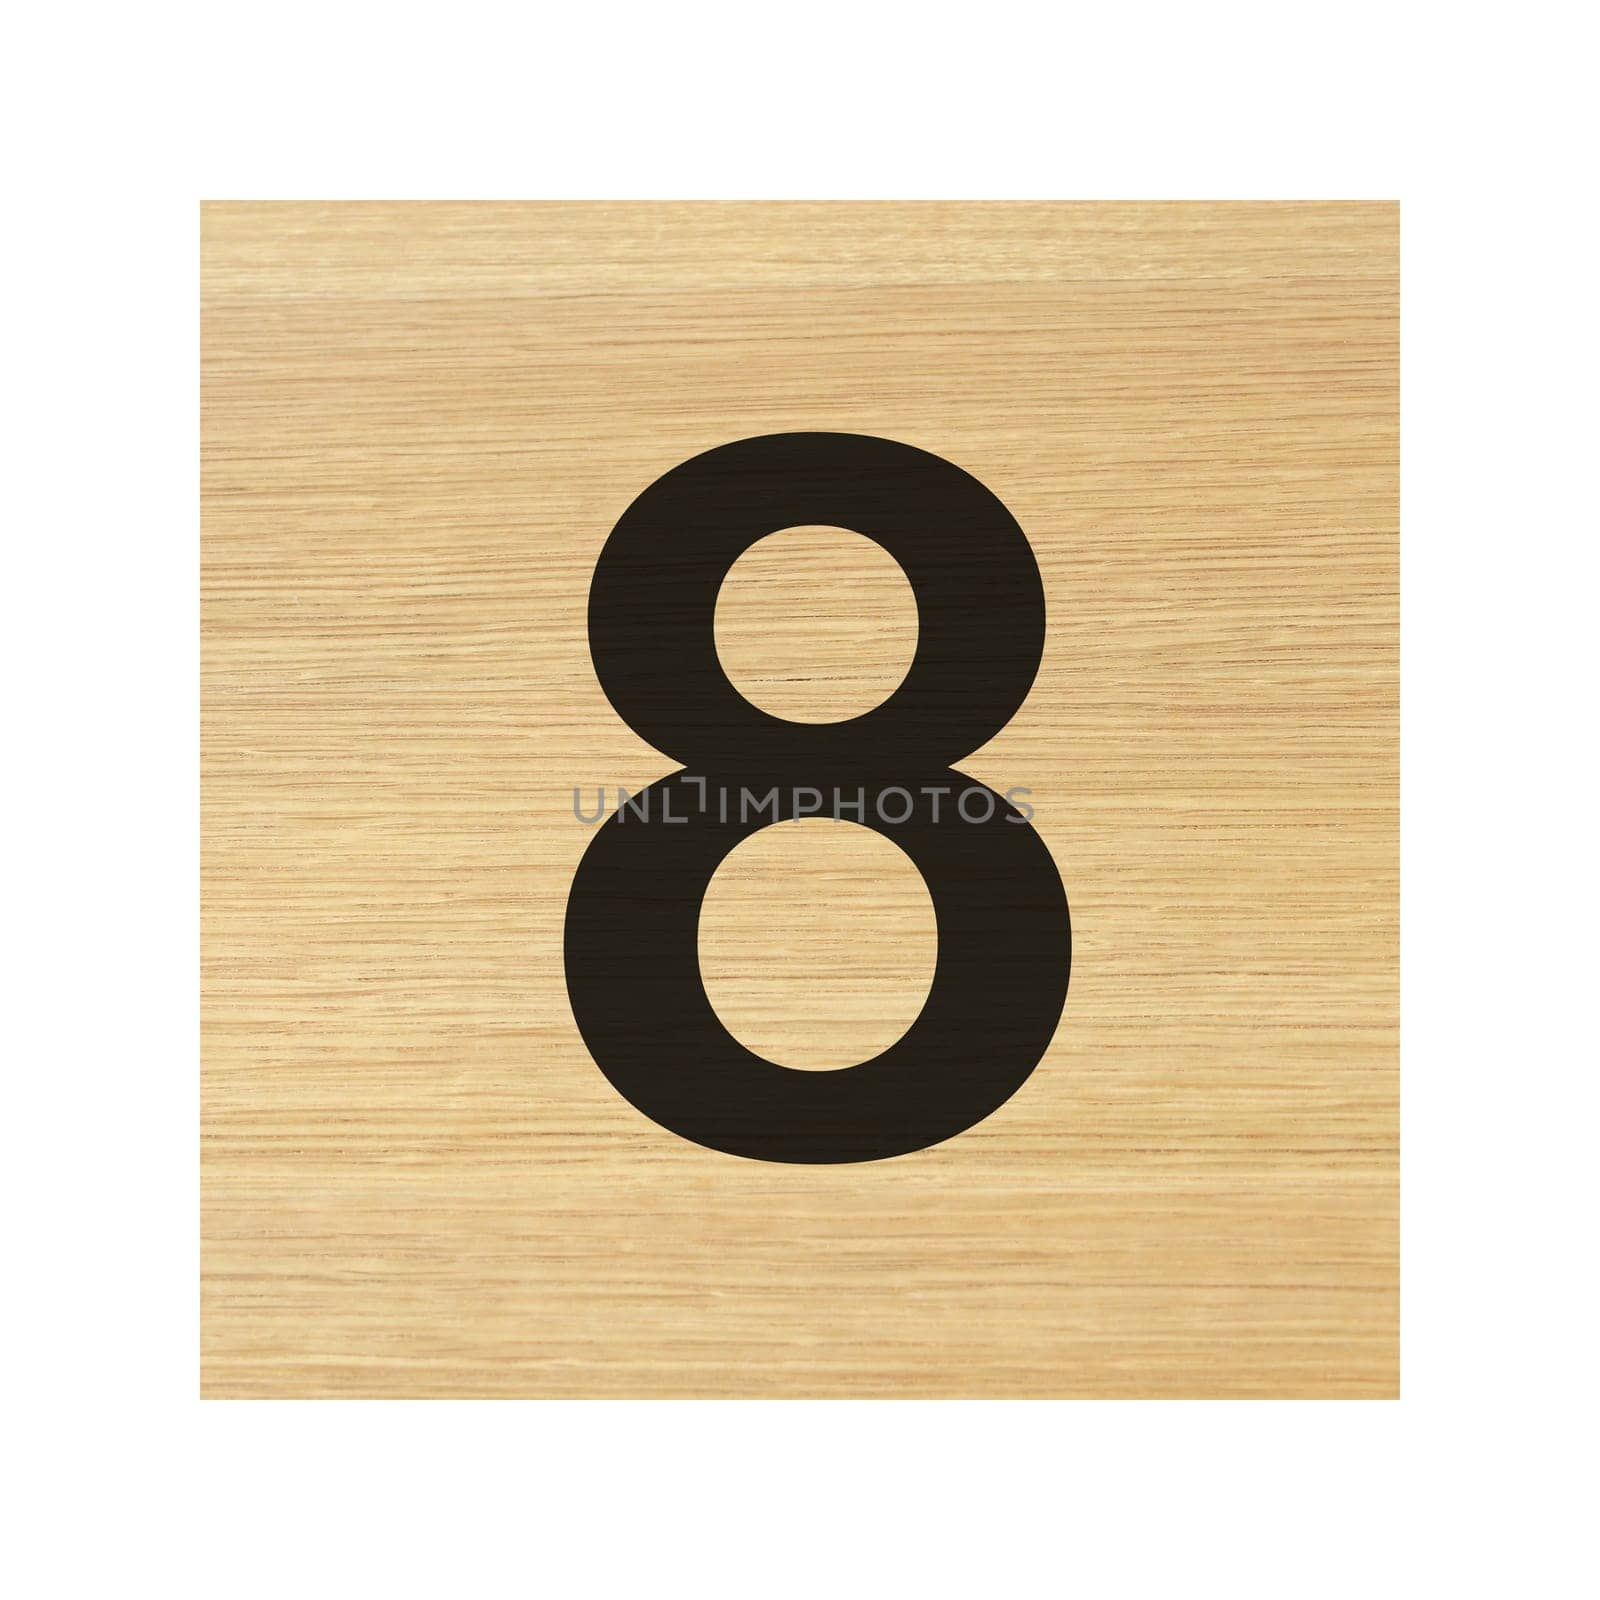 An Eight 8 wood block on white with clipping path